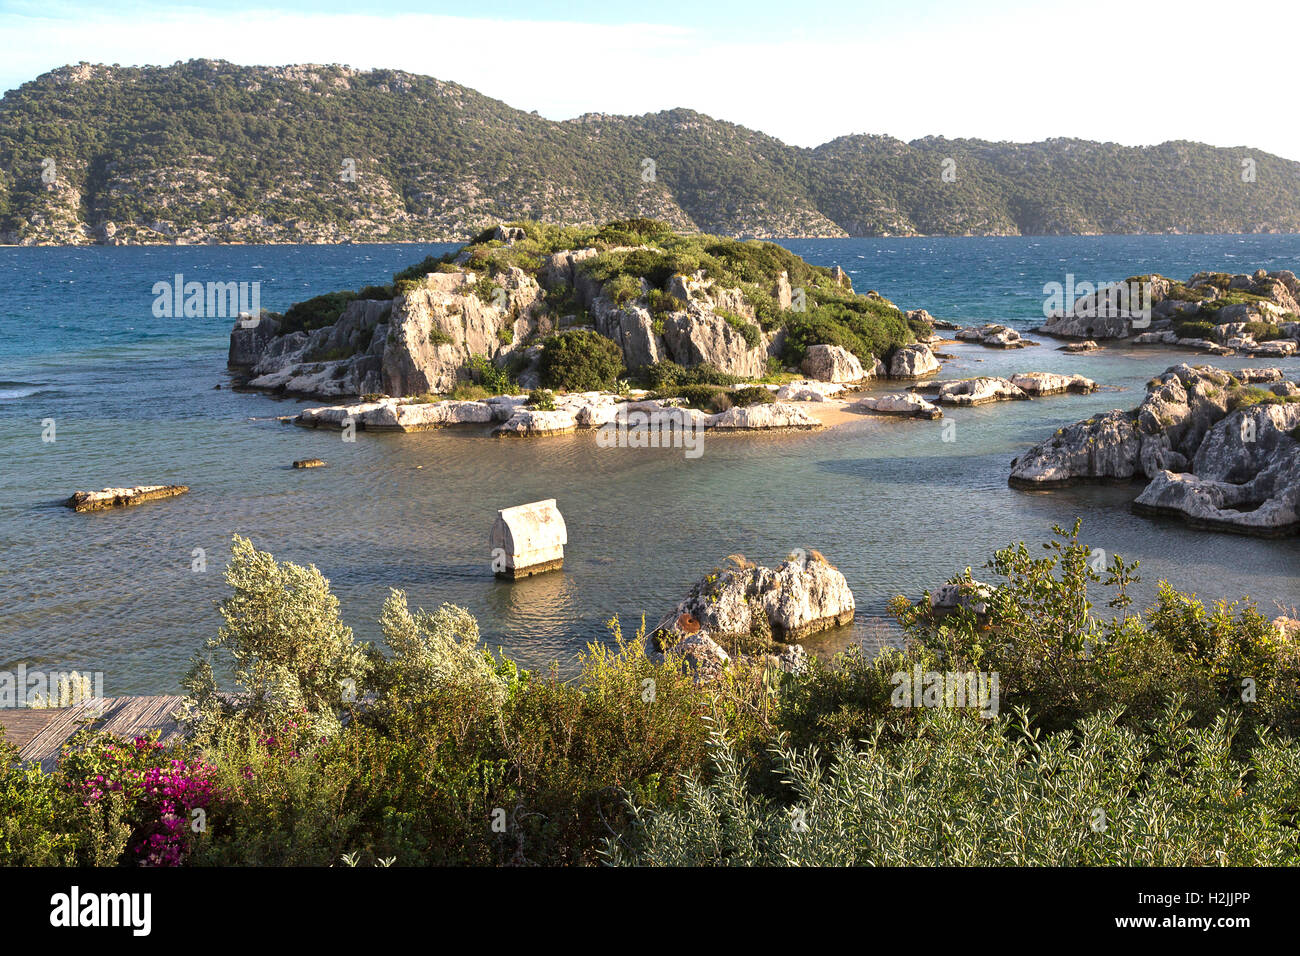 Little island and a lycian style sarcophagus in Kale Village along the Mediterranean coast of Turkey Stock Photo